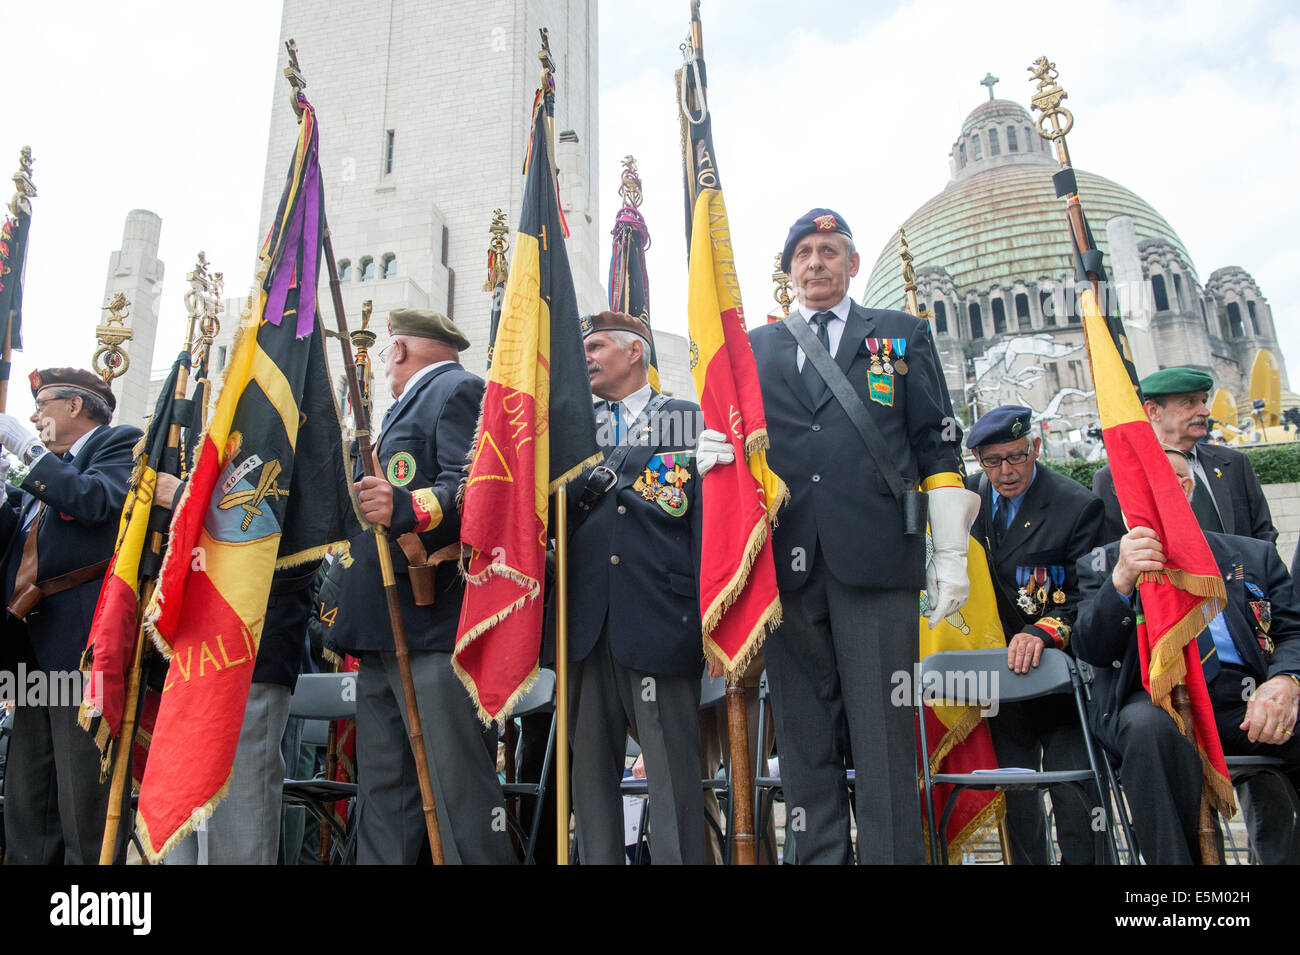 Luettich, Belgium. 04th Aug, 2014. Belgian veterans take part in the international memorial ceremony for the 100th anniversary of the beginning of the First World War in Luettich, Belgium, 04 August 2014. Photo: Maurizio Gambarini/dpa/Alamy Live News Stock Photo